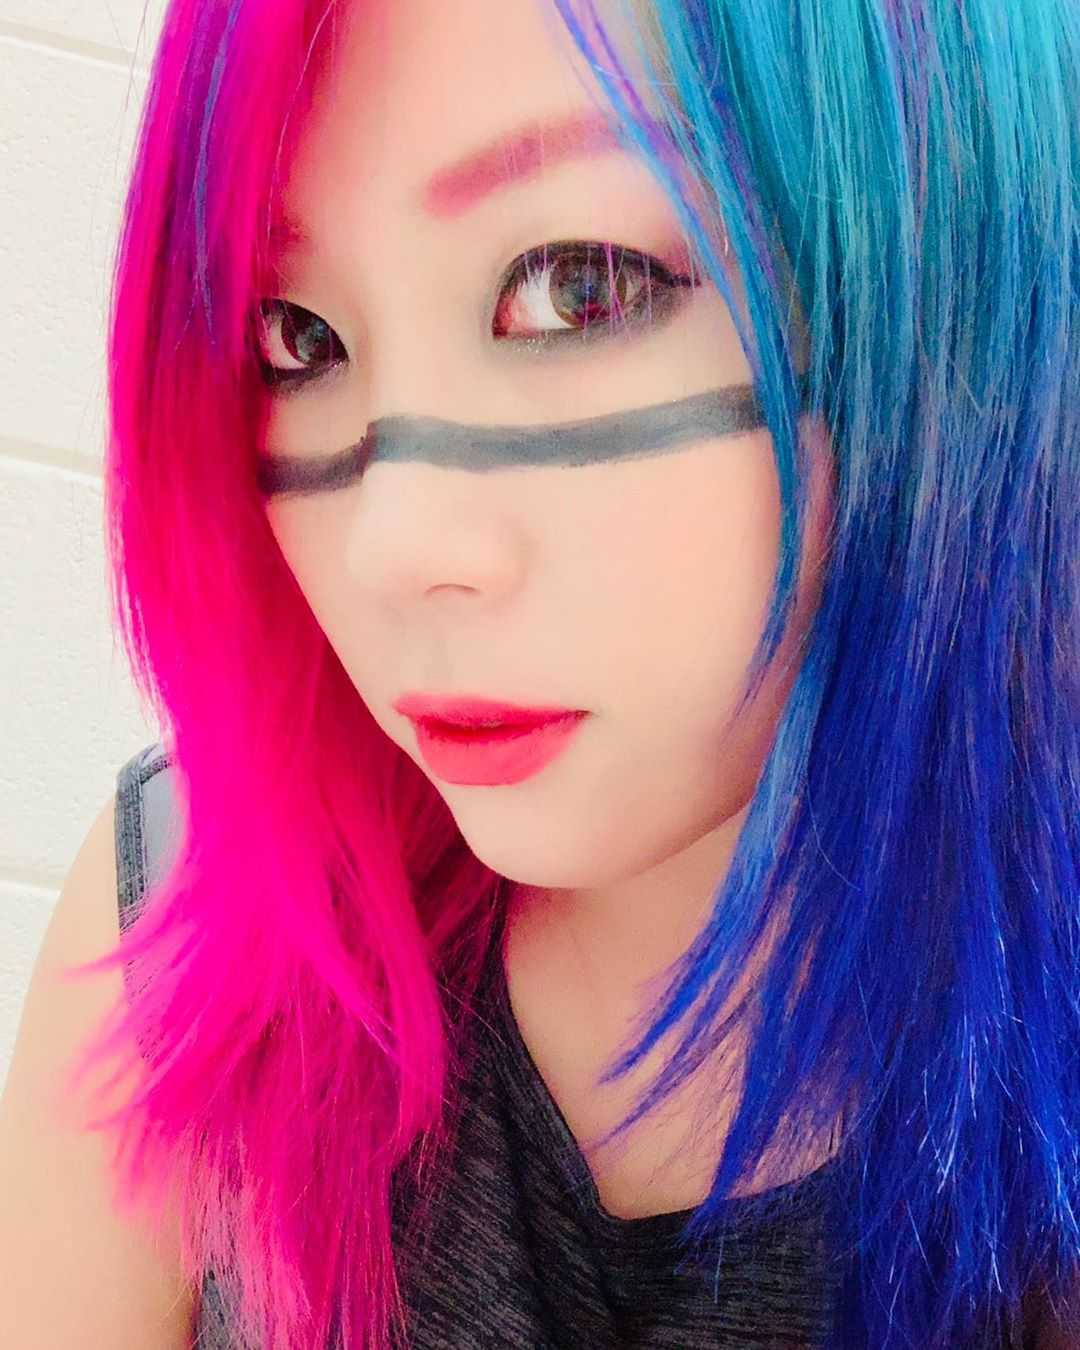 70+ Hot Pictures Of Asuka WWE Diva Unveil Her Fit Sexy Body 15